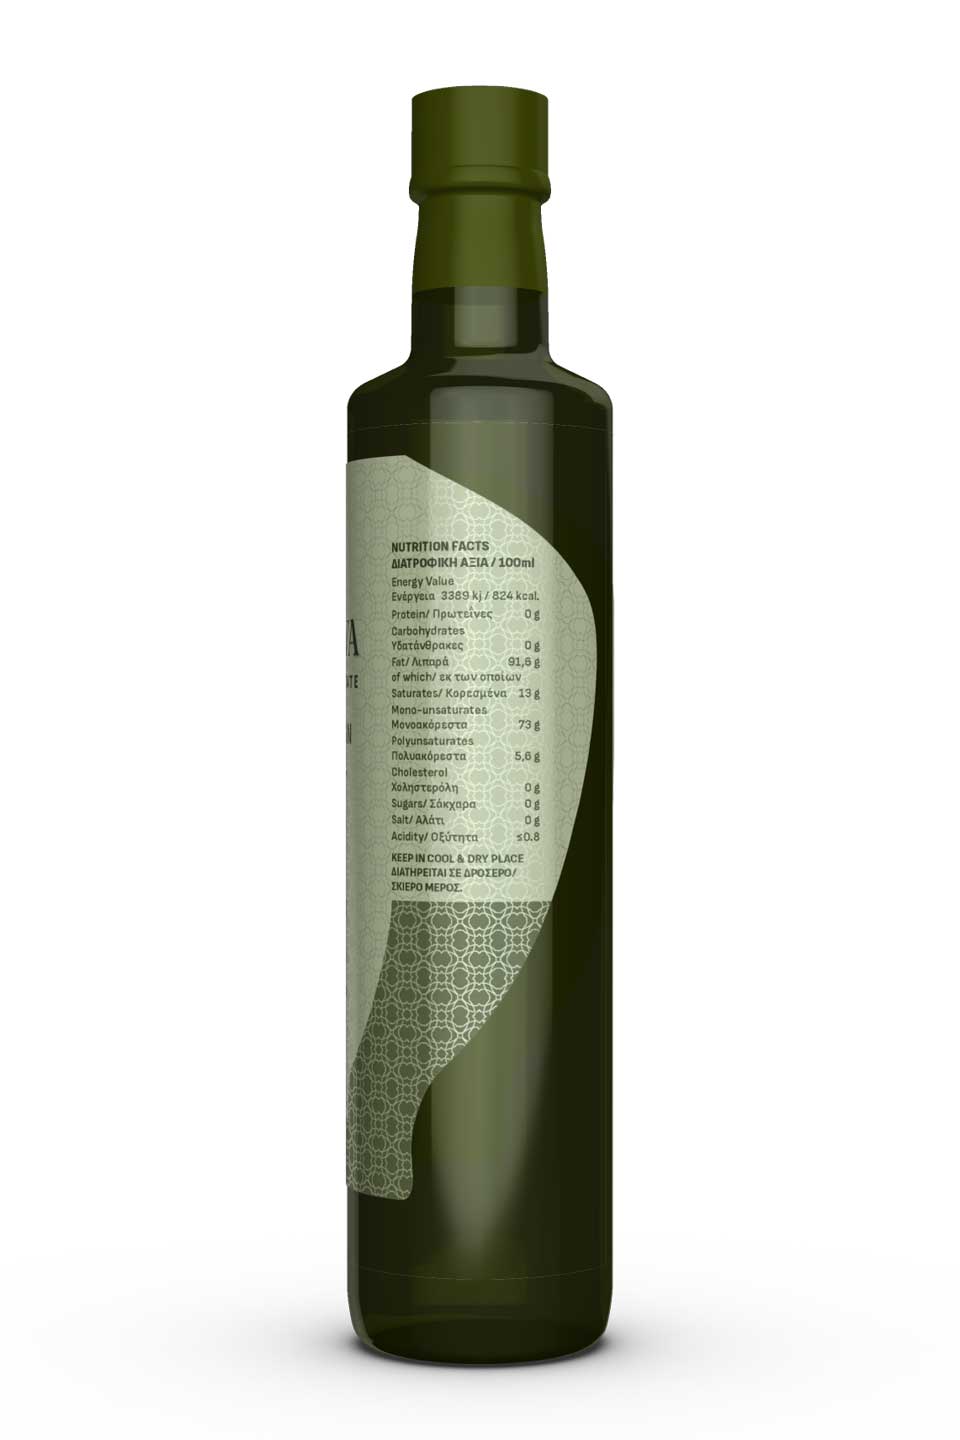 Adhesive label design for olive oil. Branding Graphic Design Agency